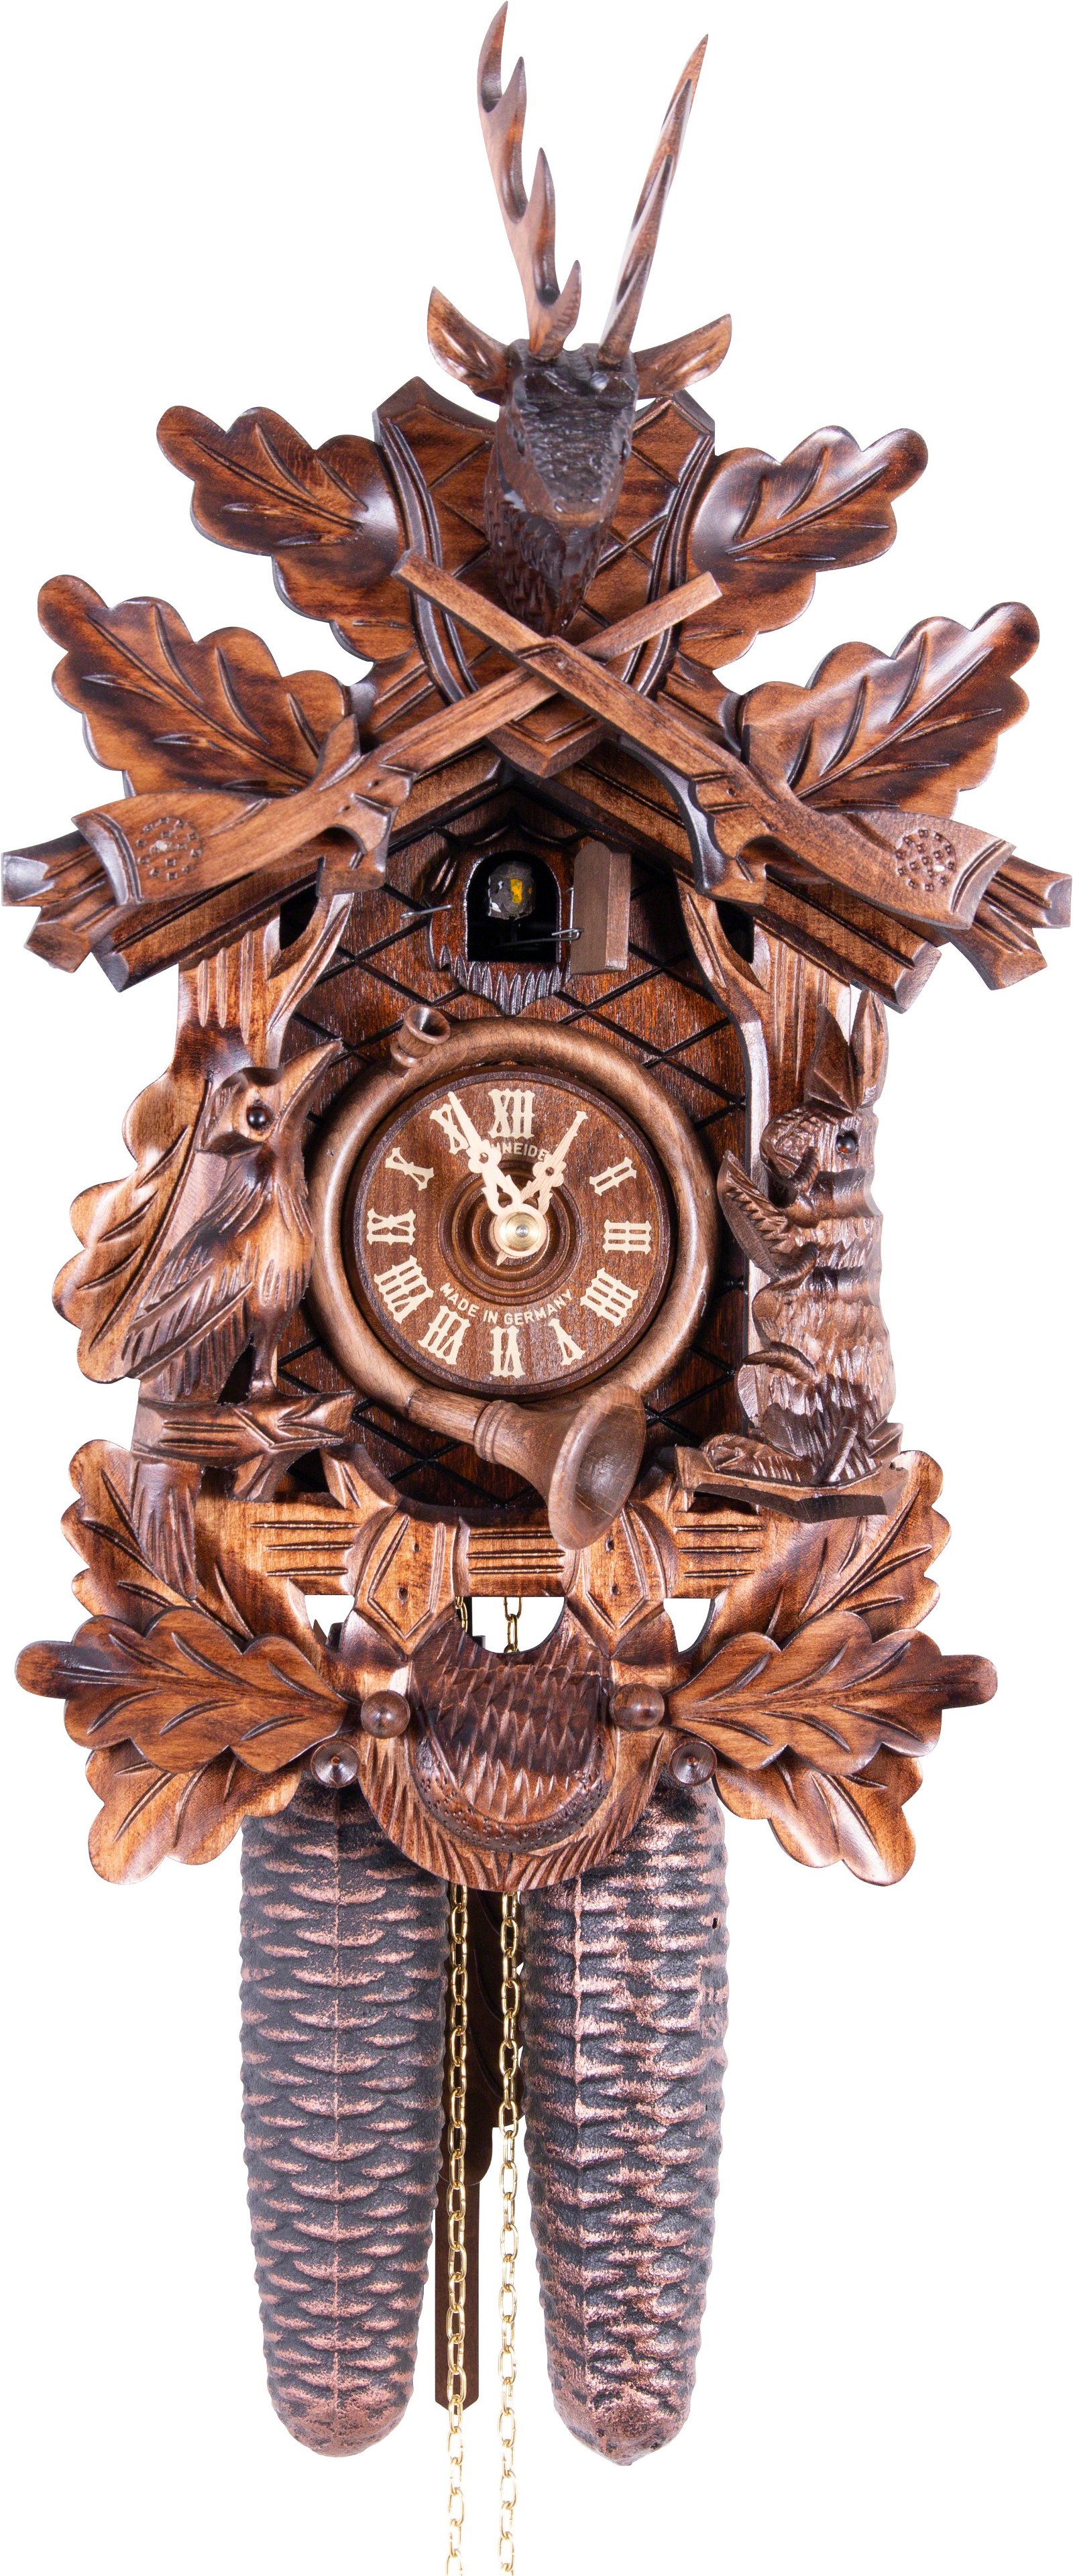 Set of 2 new 8 day cuckoo clock chains with hooks and ends. 